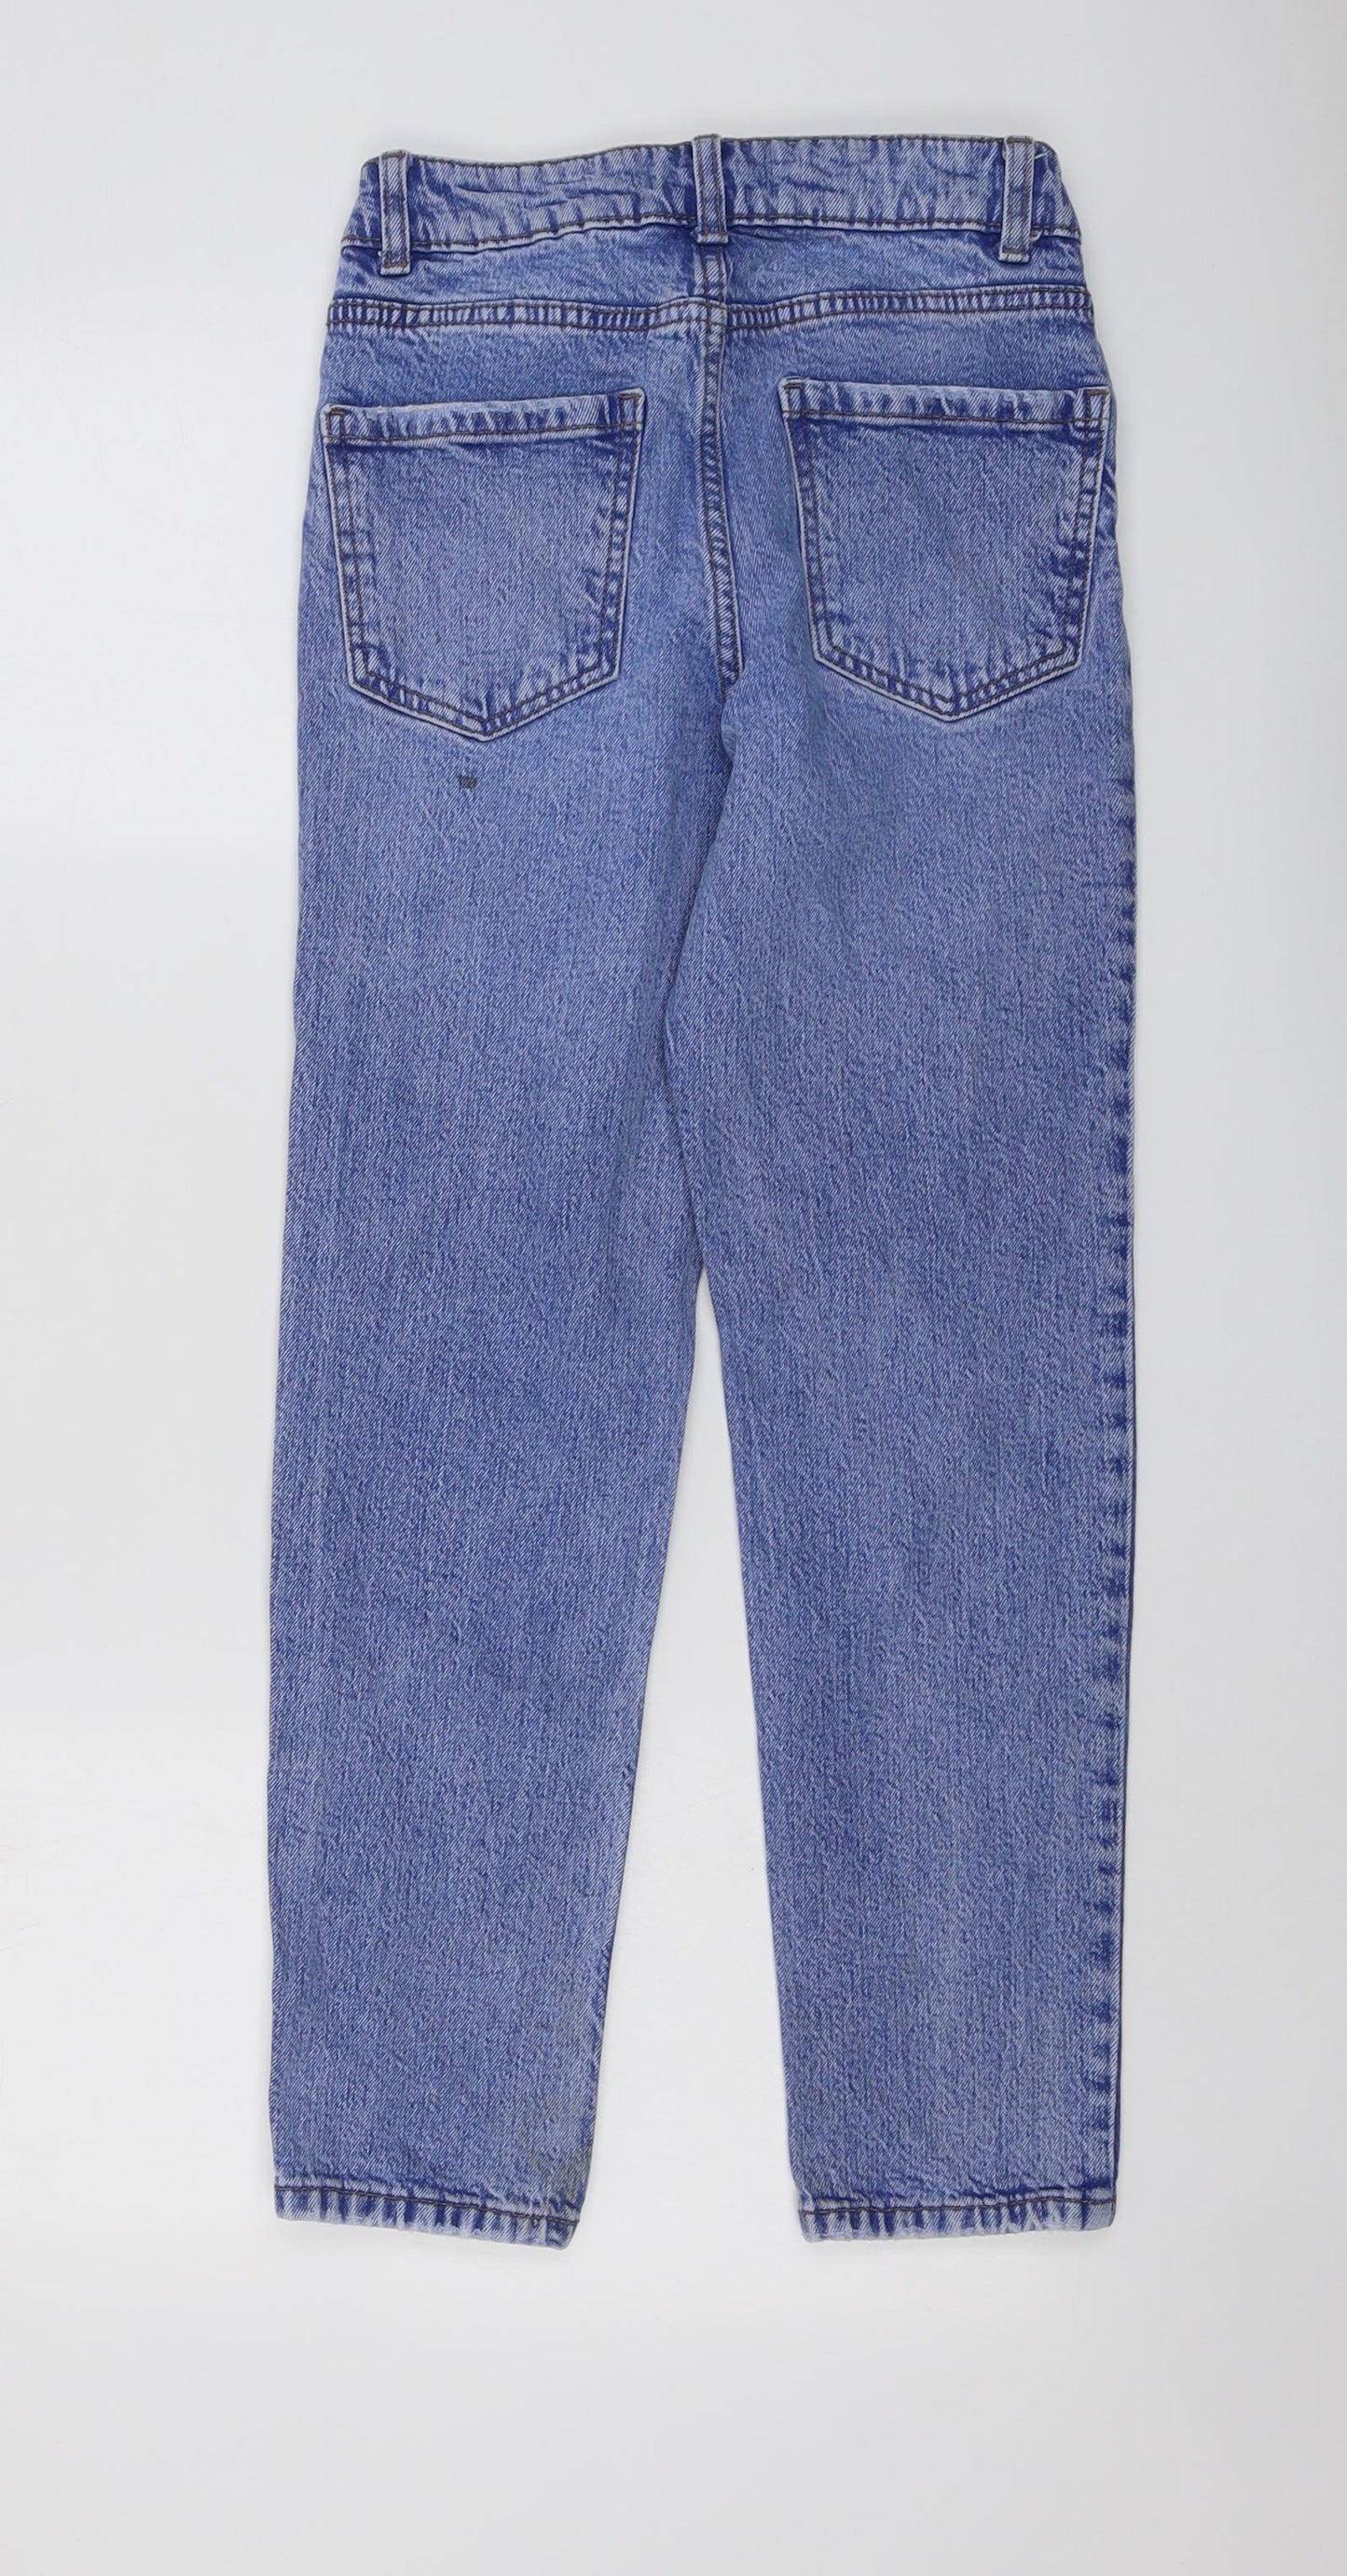 New Look Girls Blue Cotton Skinny Jeans Size 11 Years Regular Button